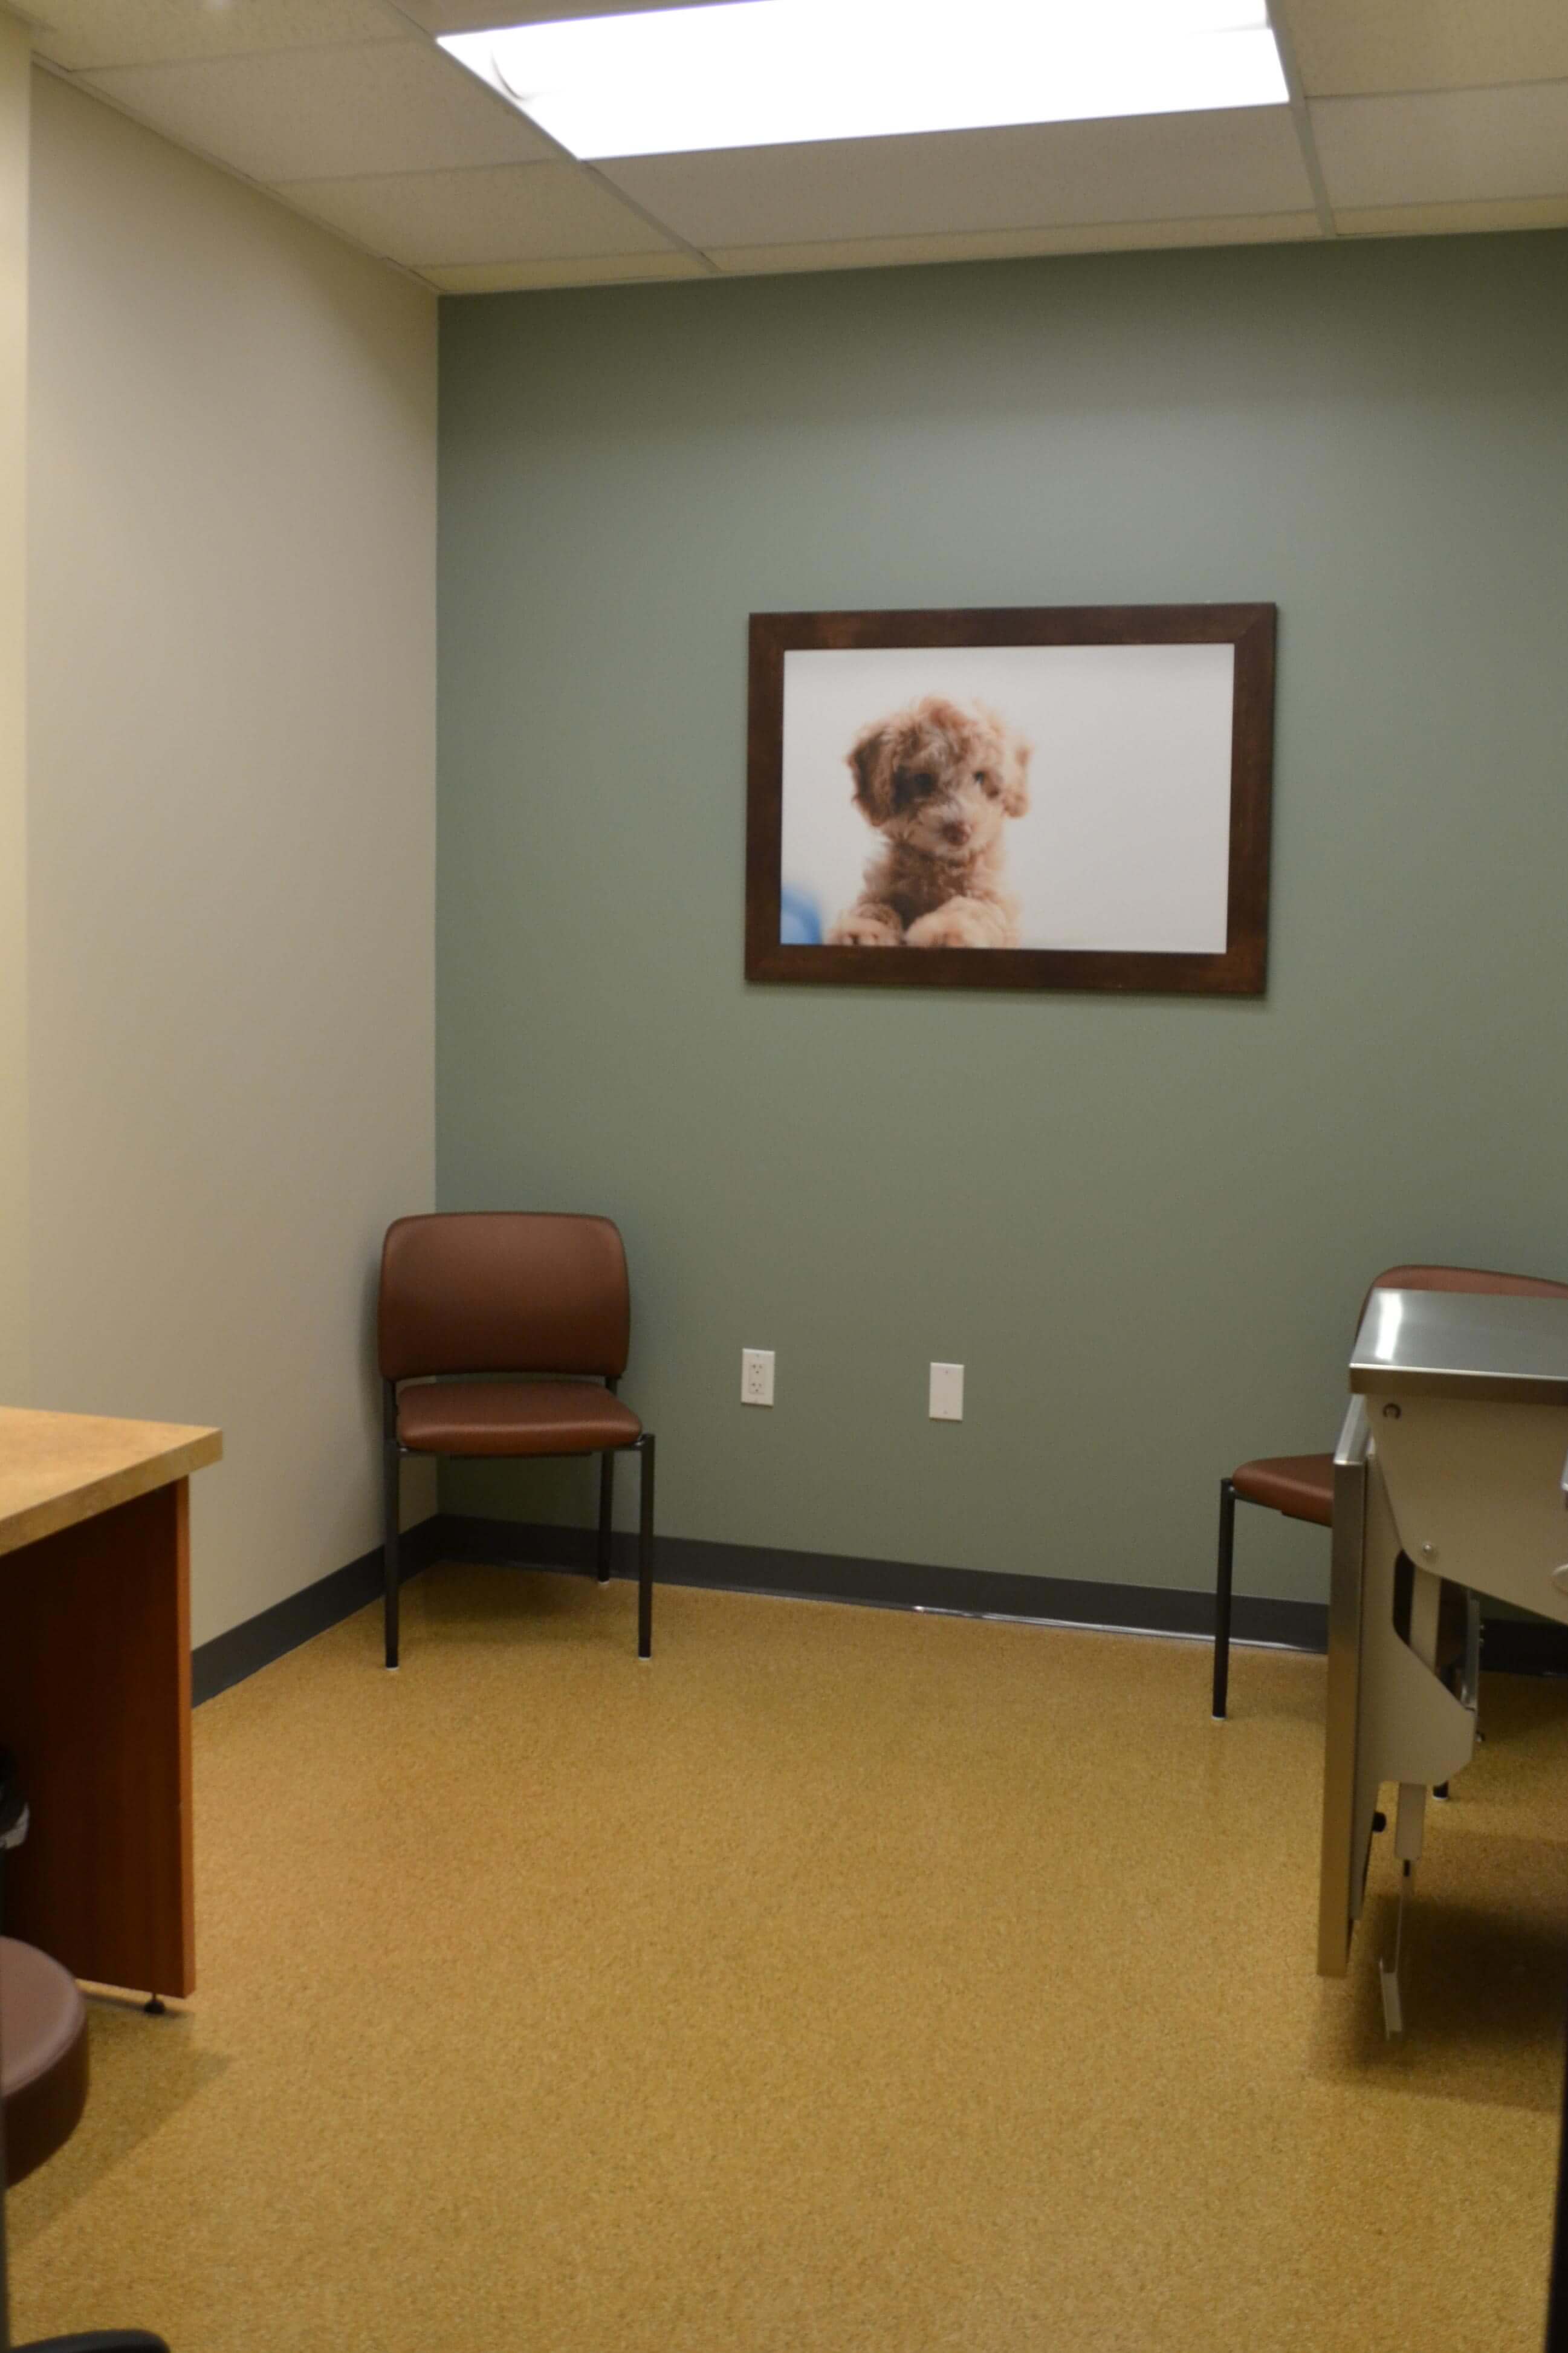 Exam room has chairs, counter, and a photo on the wall.